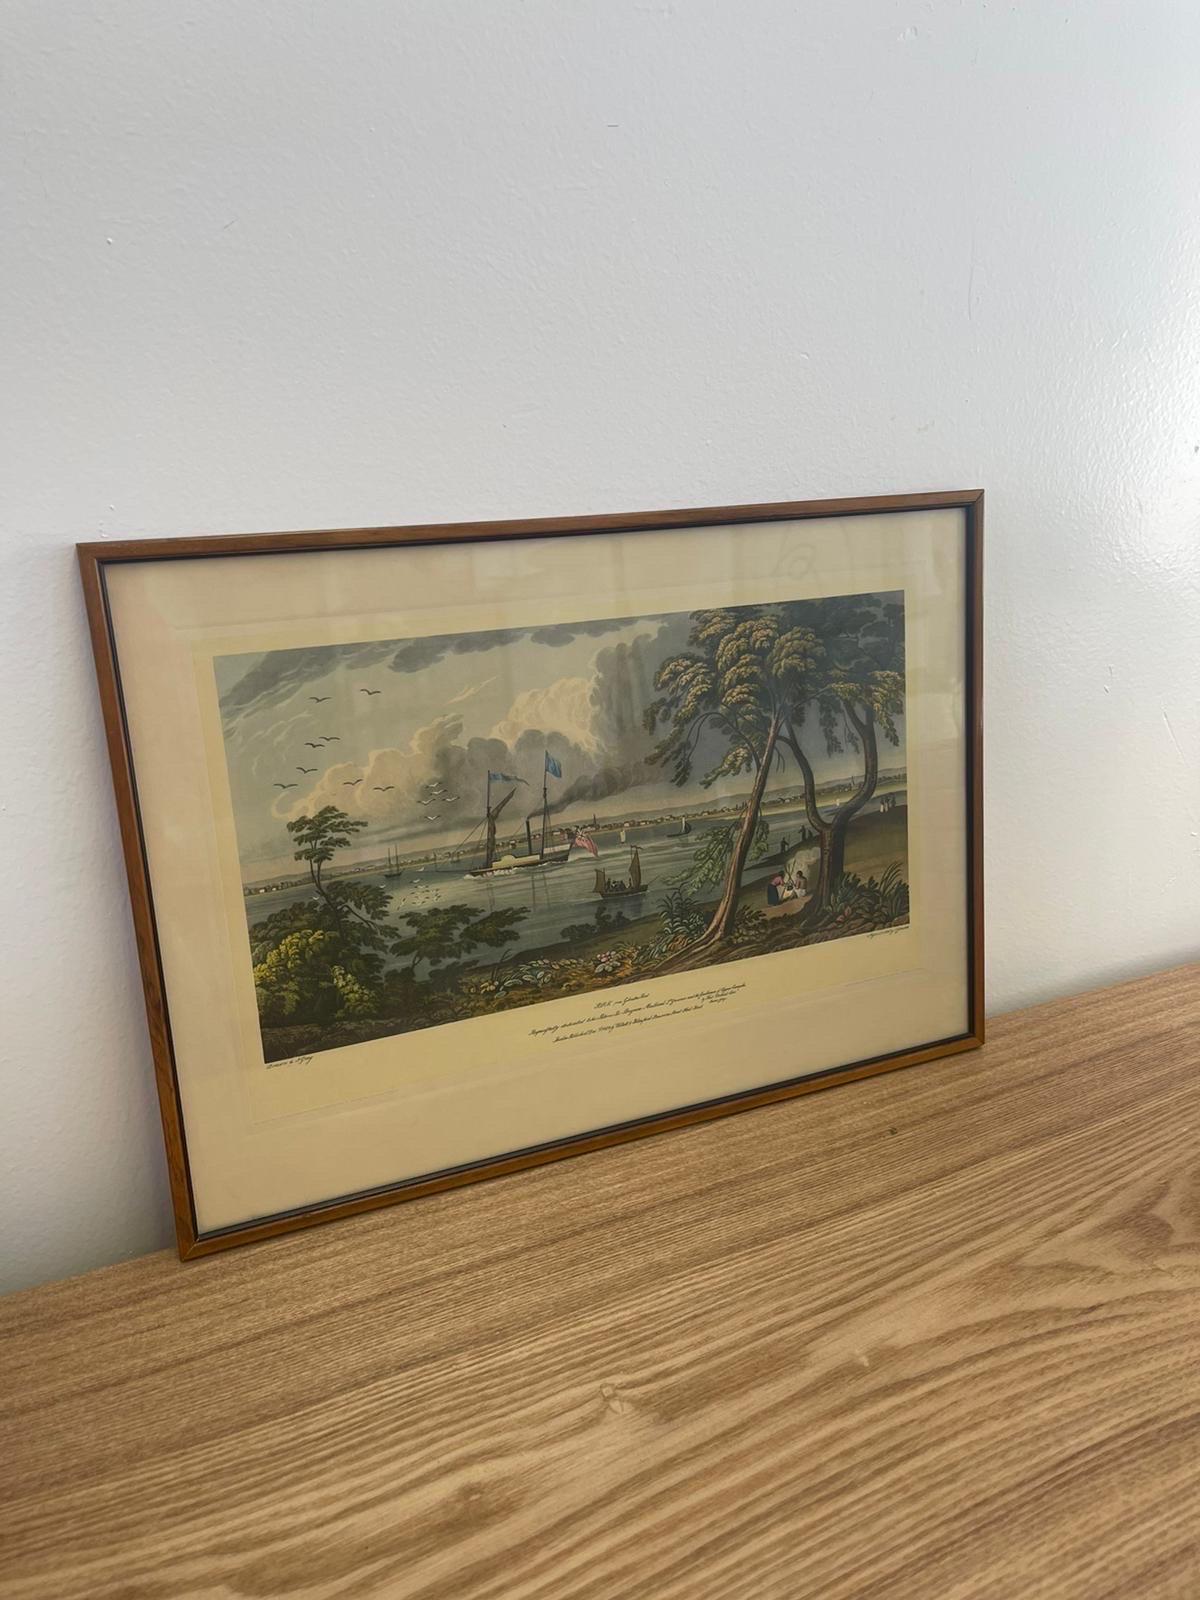 Dedication and information about this Print are included at the bottom of the frame. Within wooden frames.Two similar artwork are available through Separate listings. Vintage Condition Consistent with Age as Pictured.

Dimensions. 19 W ; 1/2 D ; 13